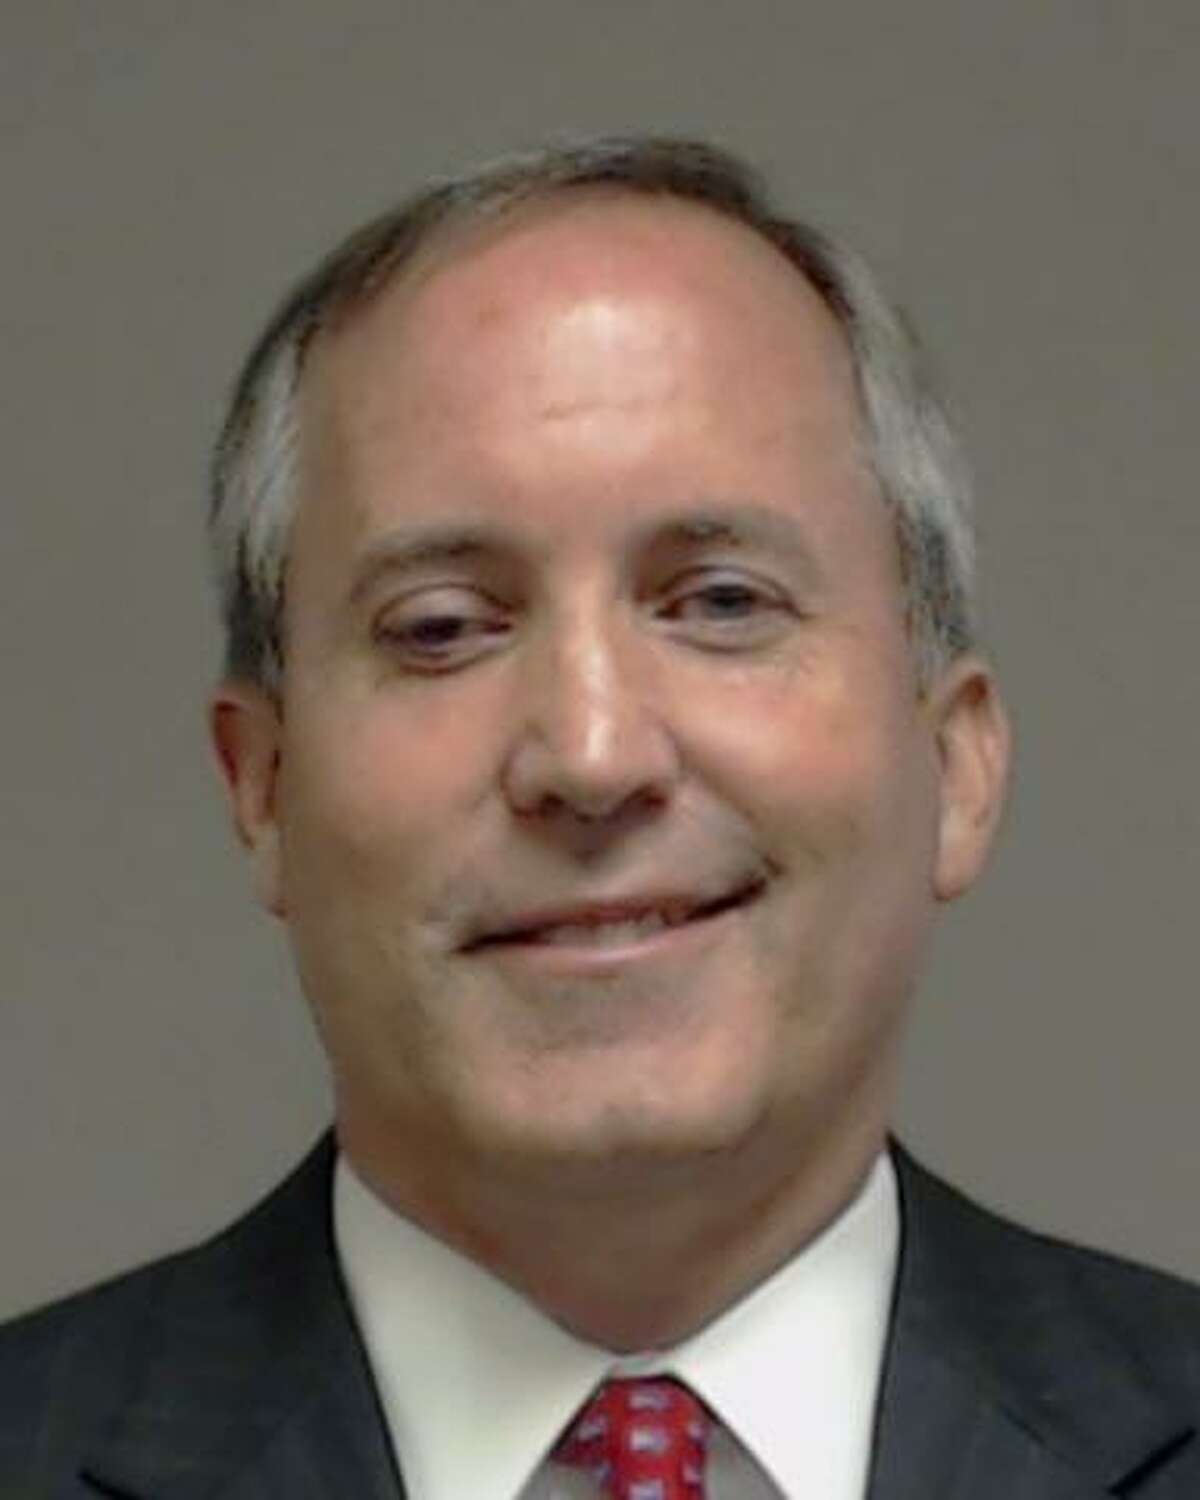 Texas Attorney General Ken Paxton was indicted on three felony fraud charges stemming from an alleged investment scheme into the McKinney-based technology company Servergy, as well as his failure to register as an investment advisor representative with the state.